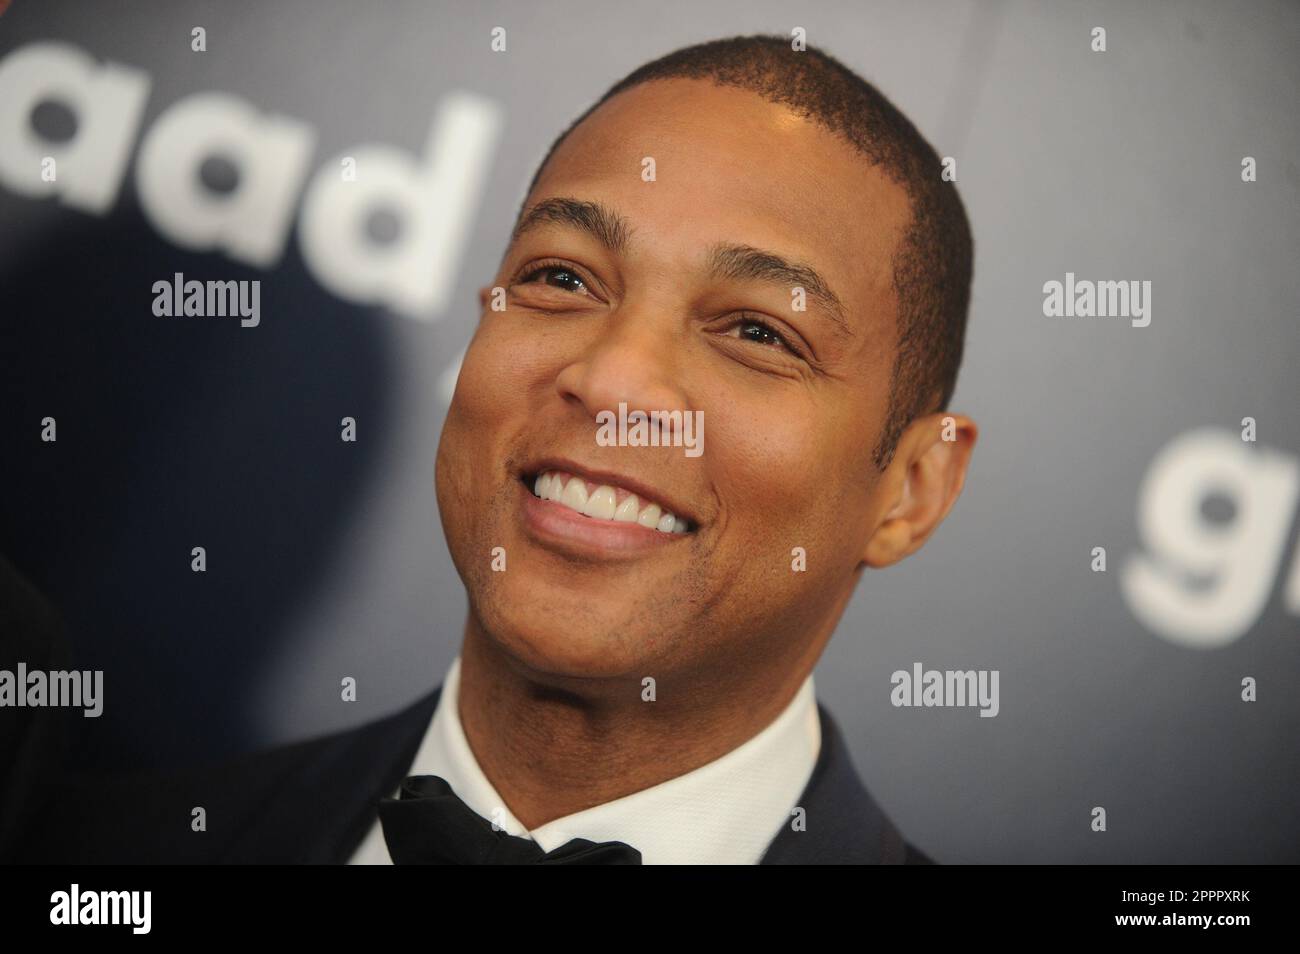 Manhattan, United States Of America. 31st Dec, 2008. NEW YORK, NY - MAY 06: Don Lemon attends as Ketel One Vodka sponsors the 28th Annual GLAAD Media Awards in New York at The Hilton Midtown on May 6, 2017 in New York City. People: Don Lemon Credit: Storms Media Group/Alamy Live News Stock Photo